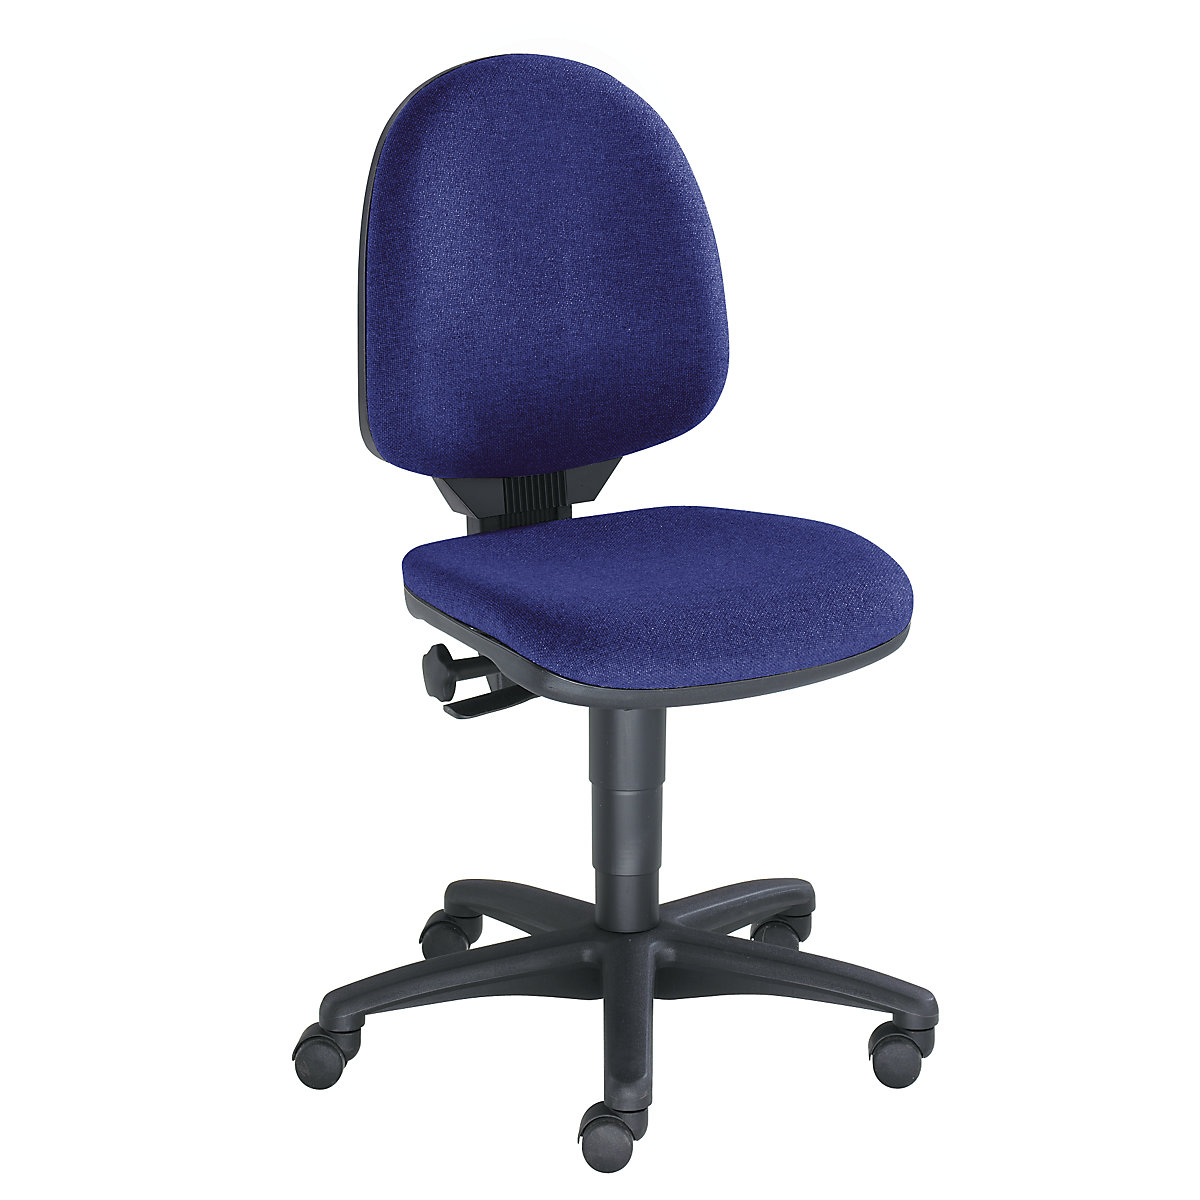 Standard swivel chair – Topstar, without arm rests, back rest 450 mm, fabric covering blue, frame black-5